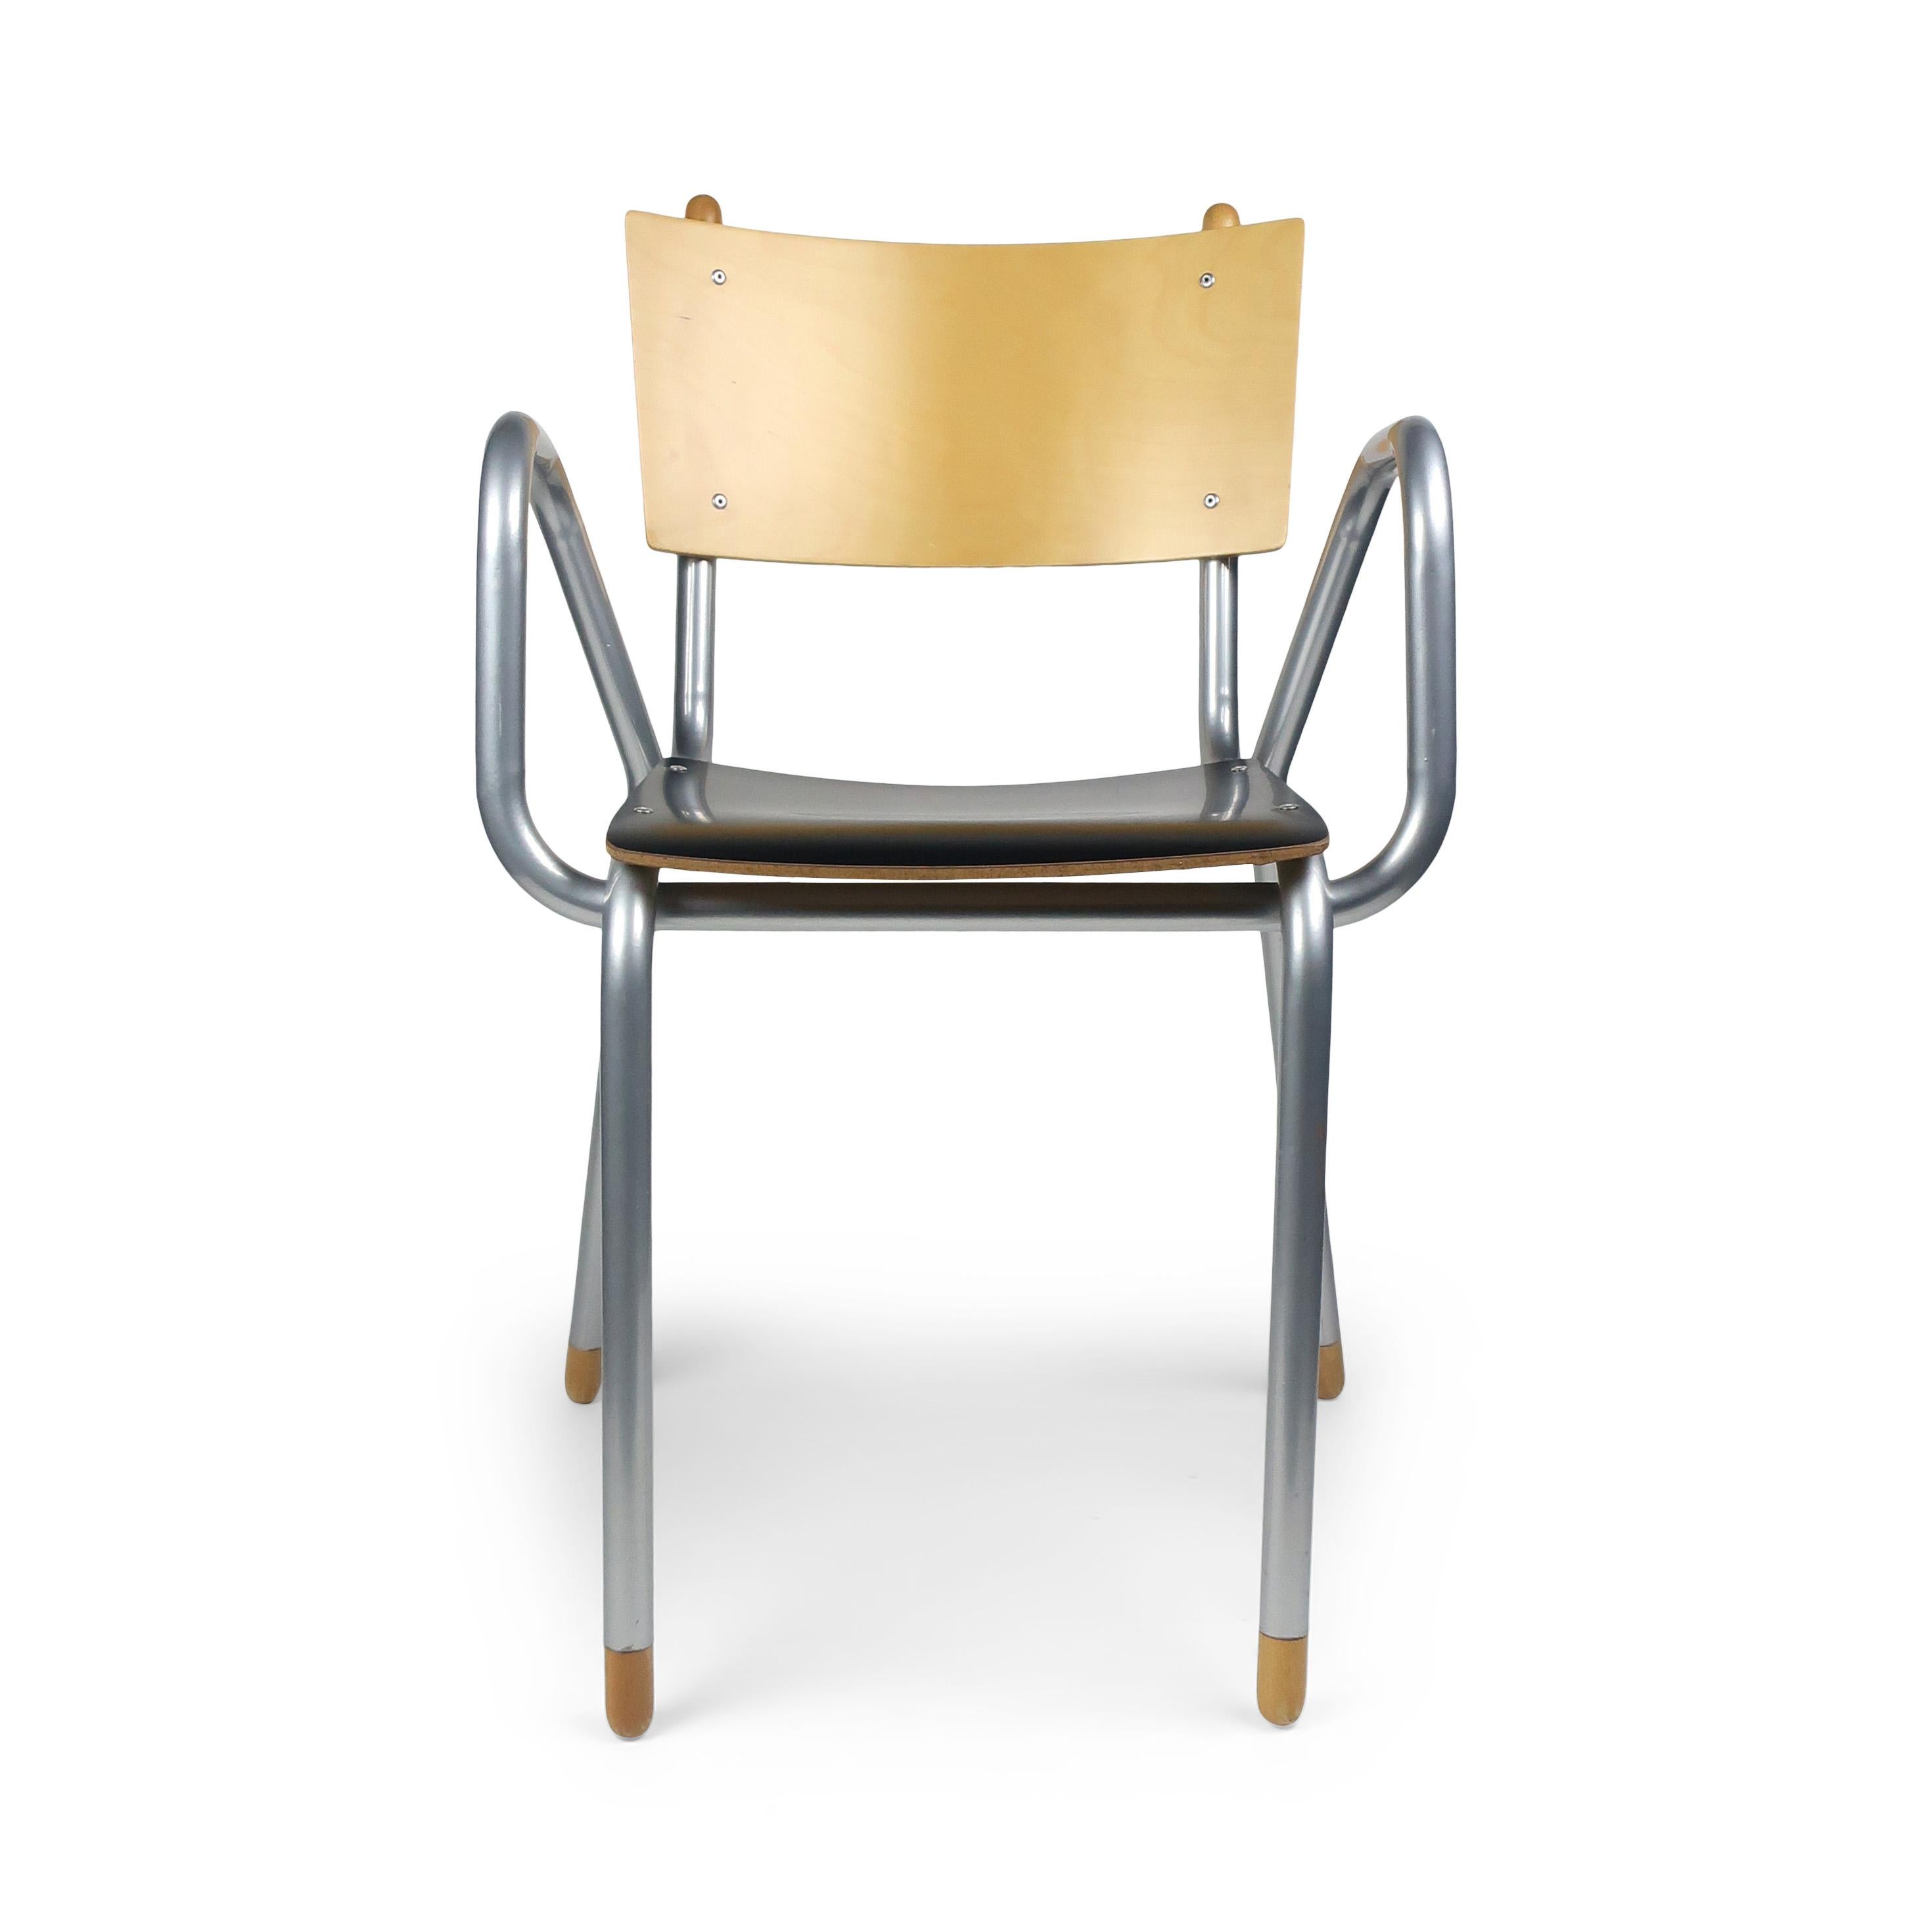 Designed by Maurizio Peregalli for ZEUS in 1996, the Classe Prima B armchairs have natural birch backs, black bilaminate seats, and silver epoxy painted metal frames. A whimsical silhouette with the attention to detail found in great Italian